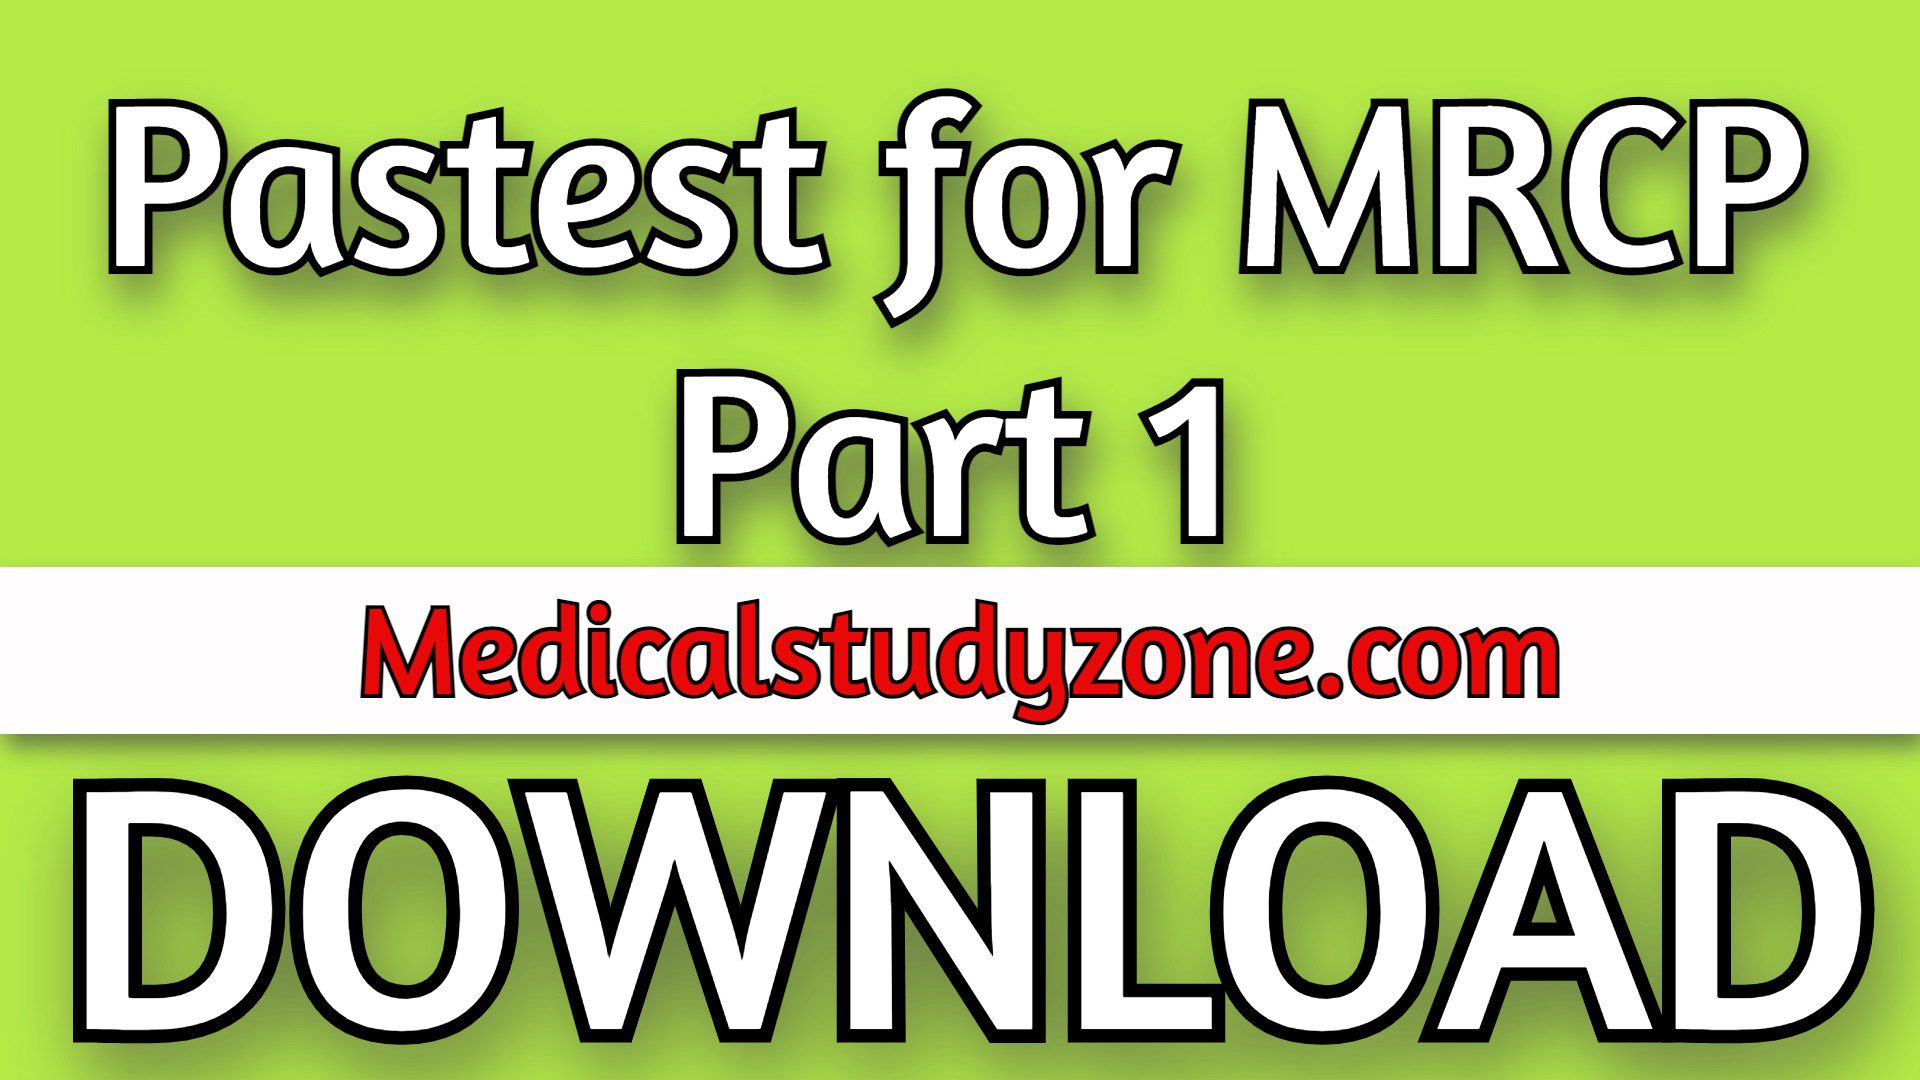 Pastest for MRCP Part 1 2022 PDF Free Download